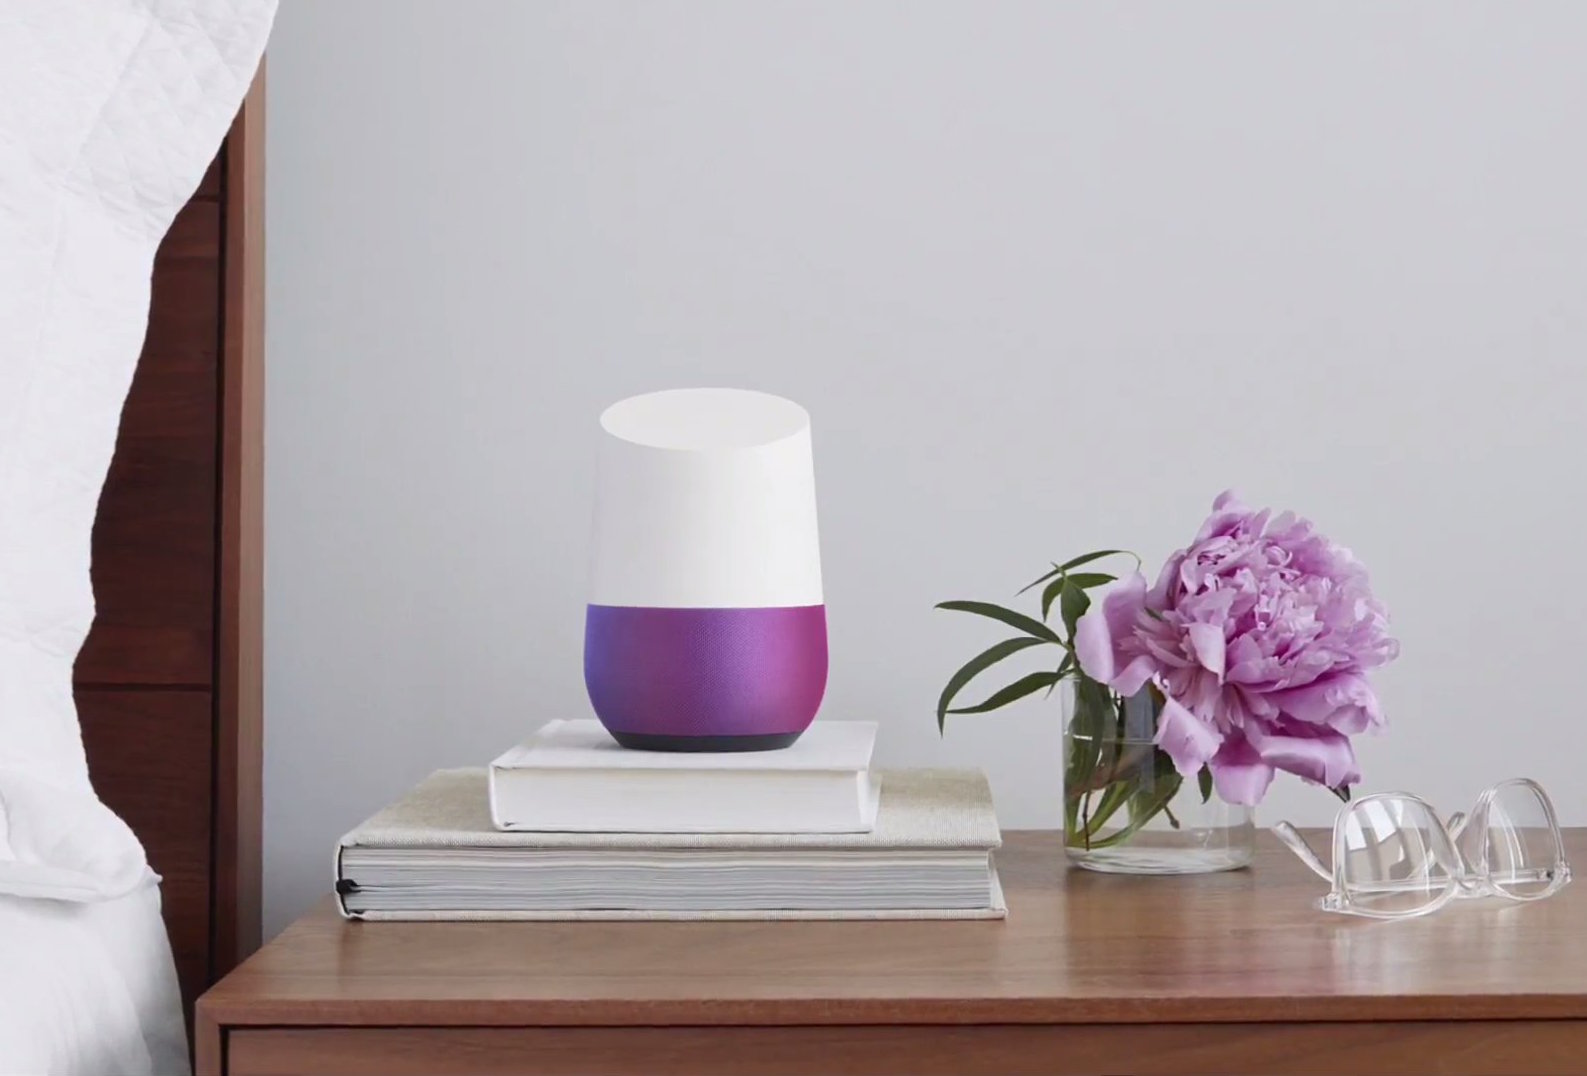 A Google Home device on a bedside table.